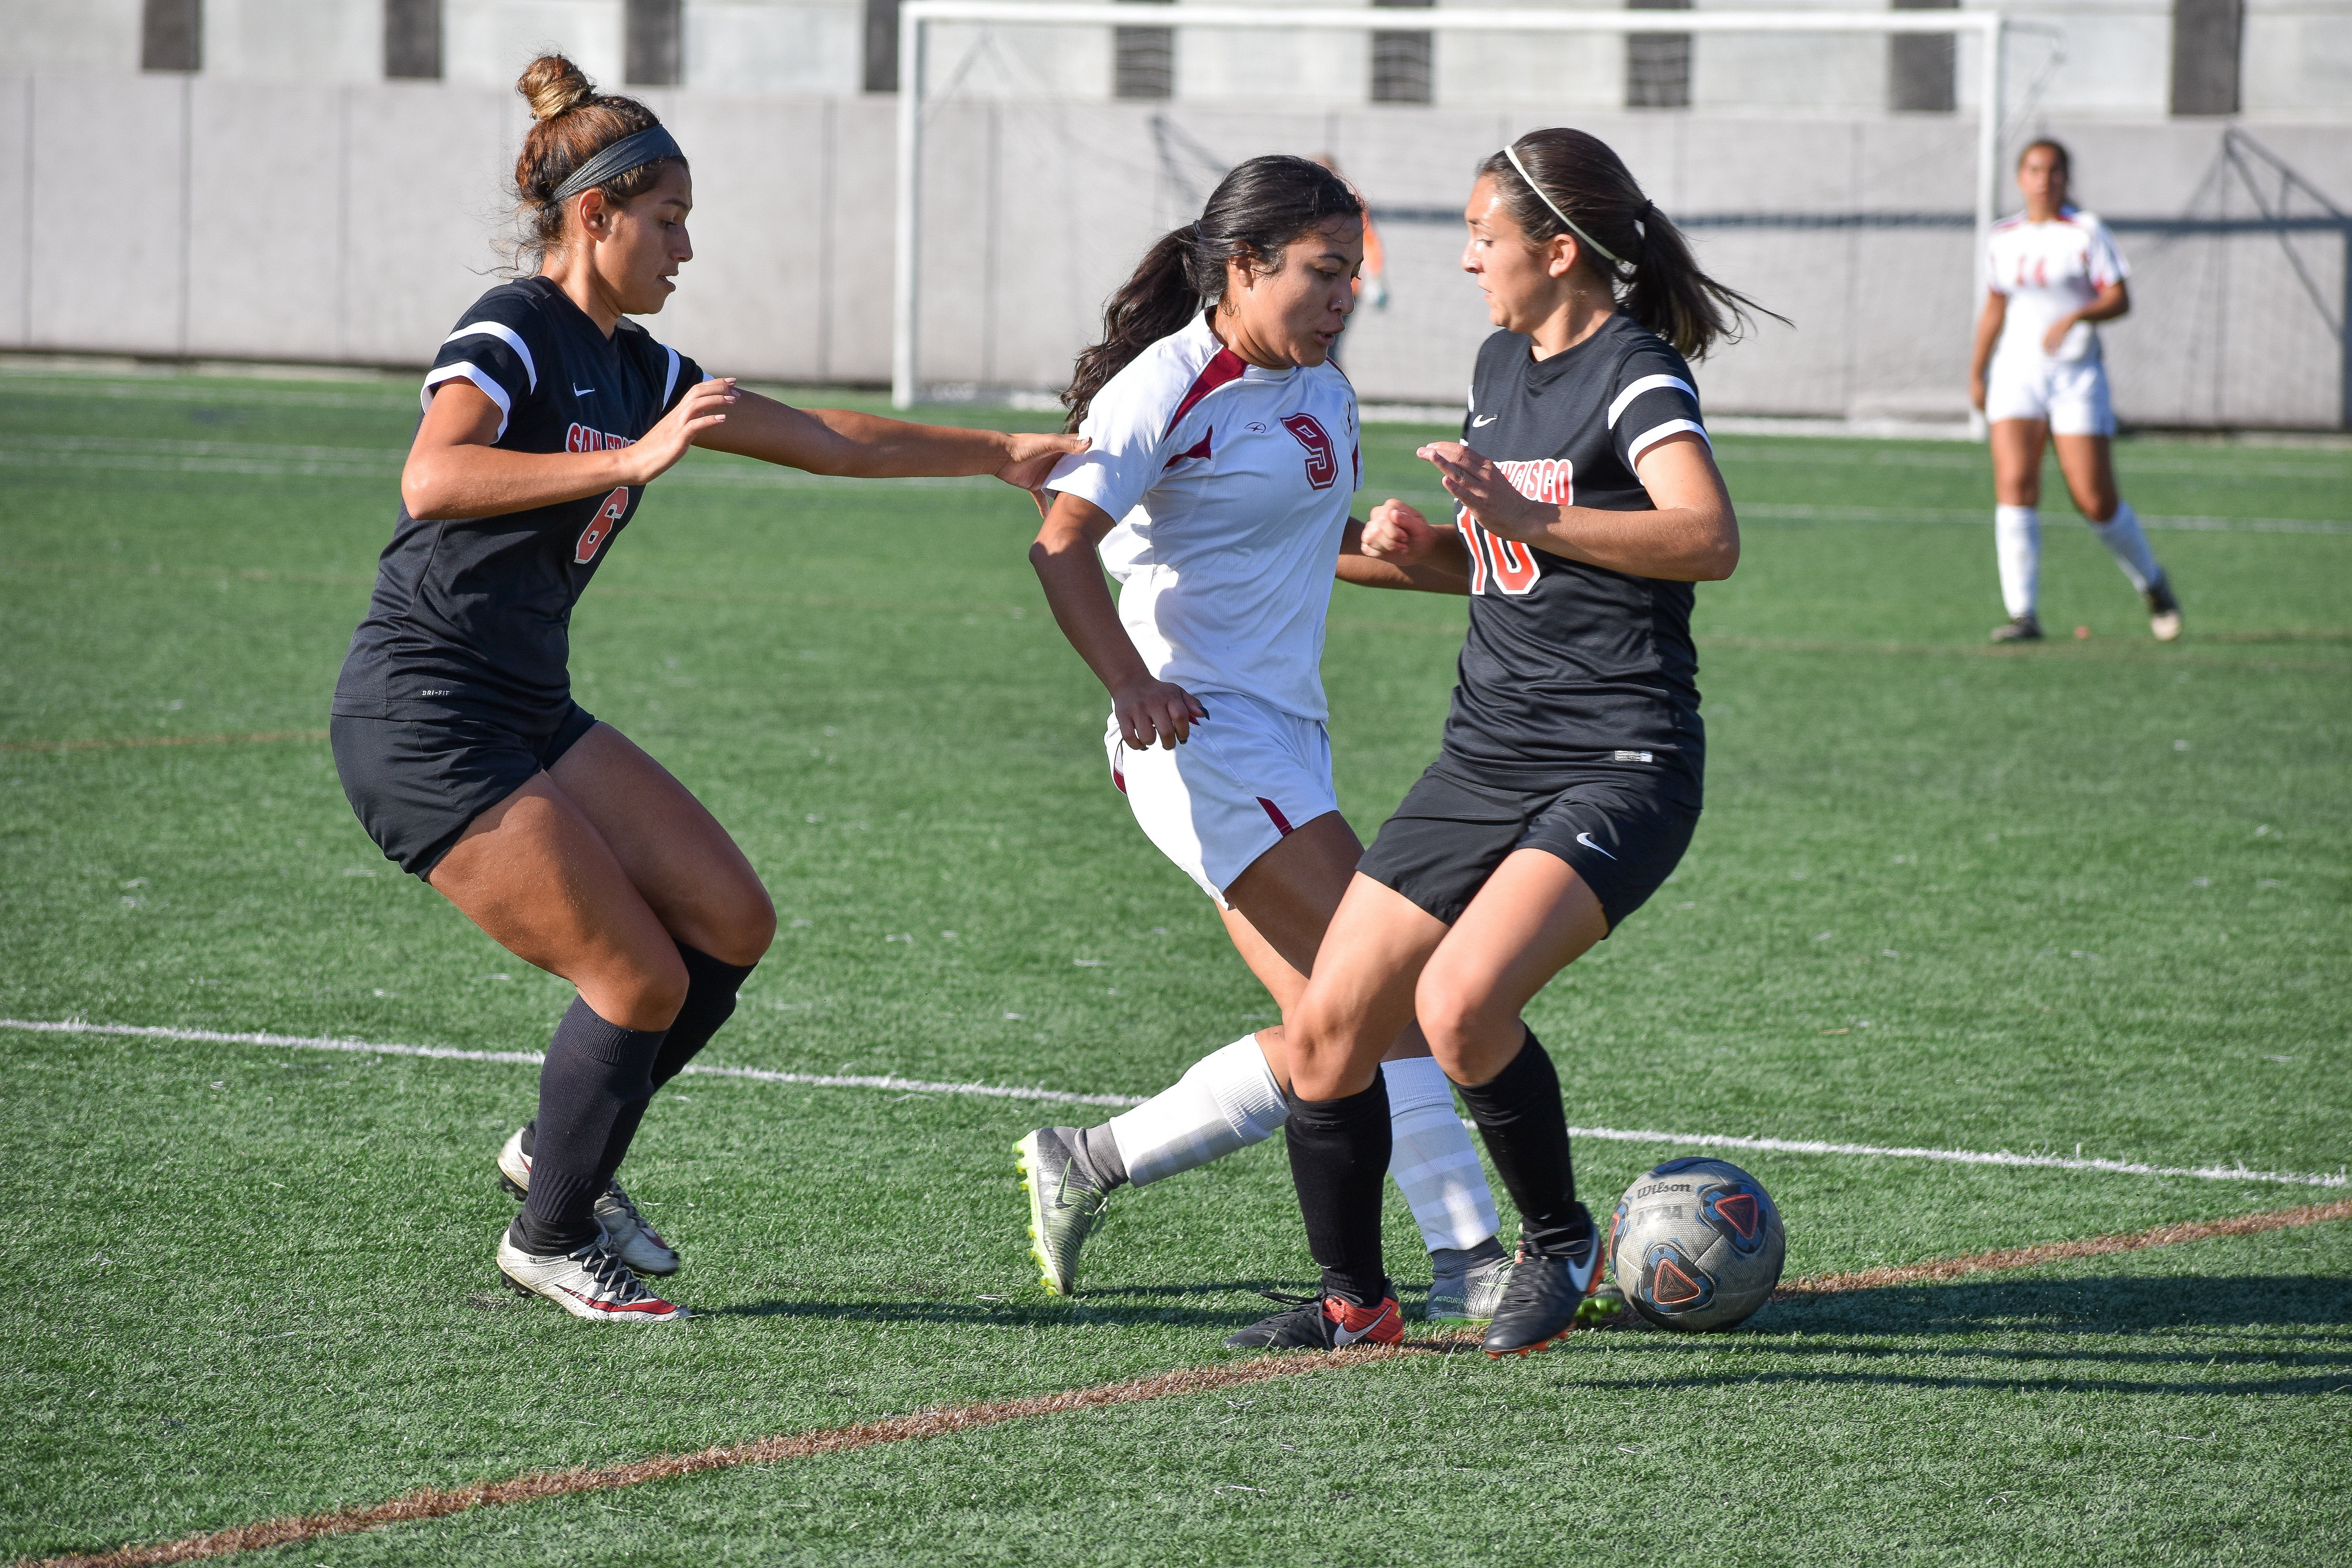 Defenders Chelsea Herrera (#6) and Shannon Garcia (#10) try take away the ball from the opponent. Photo by Julia Fuller. 